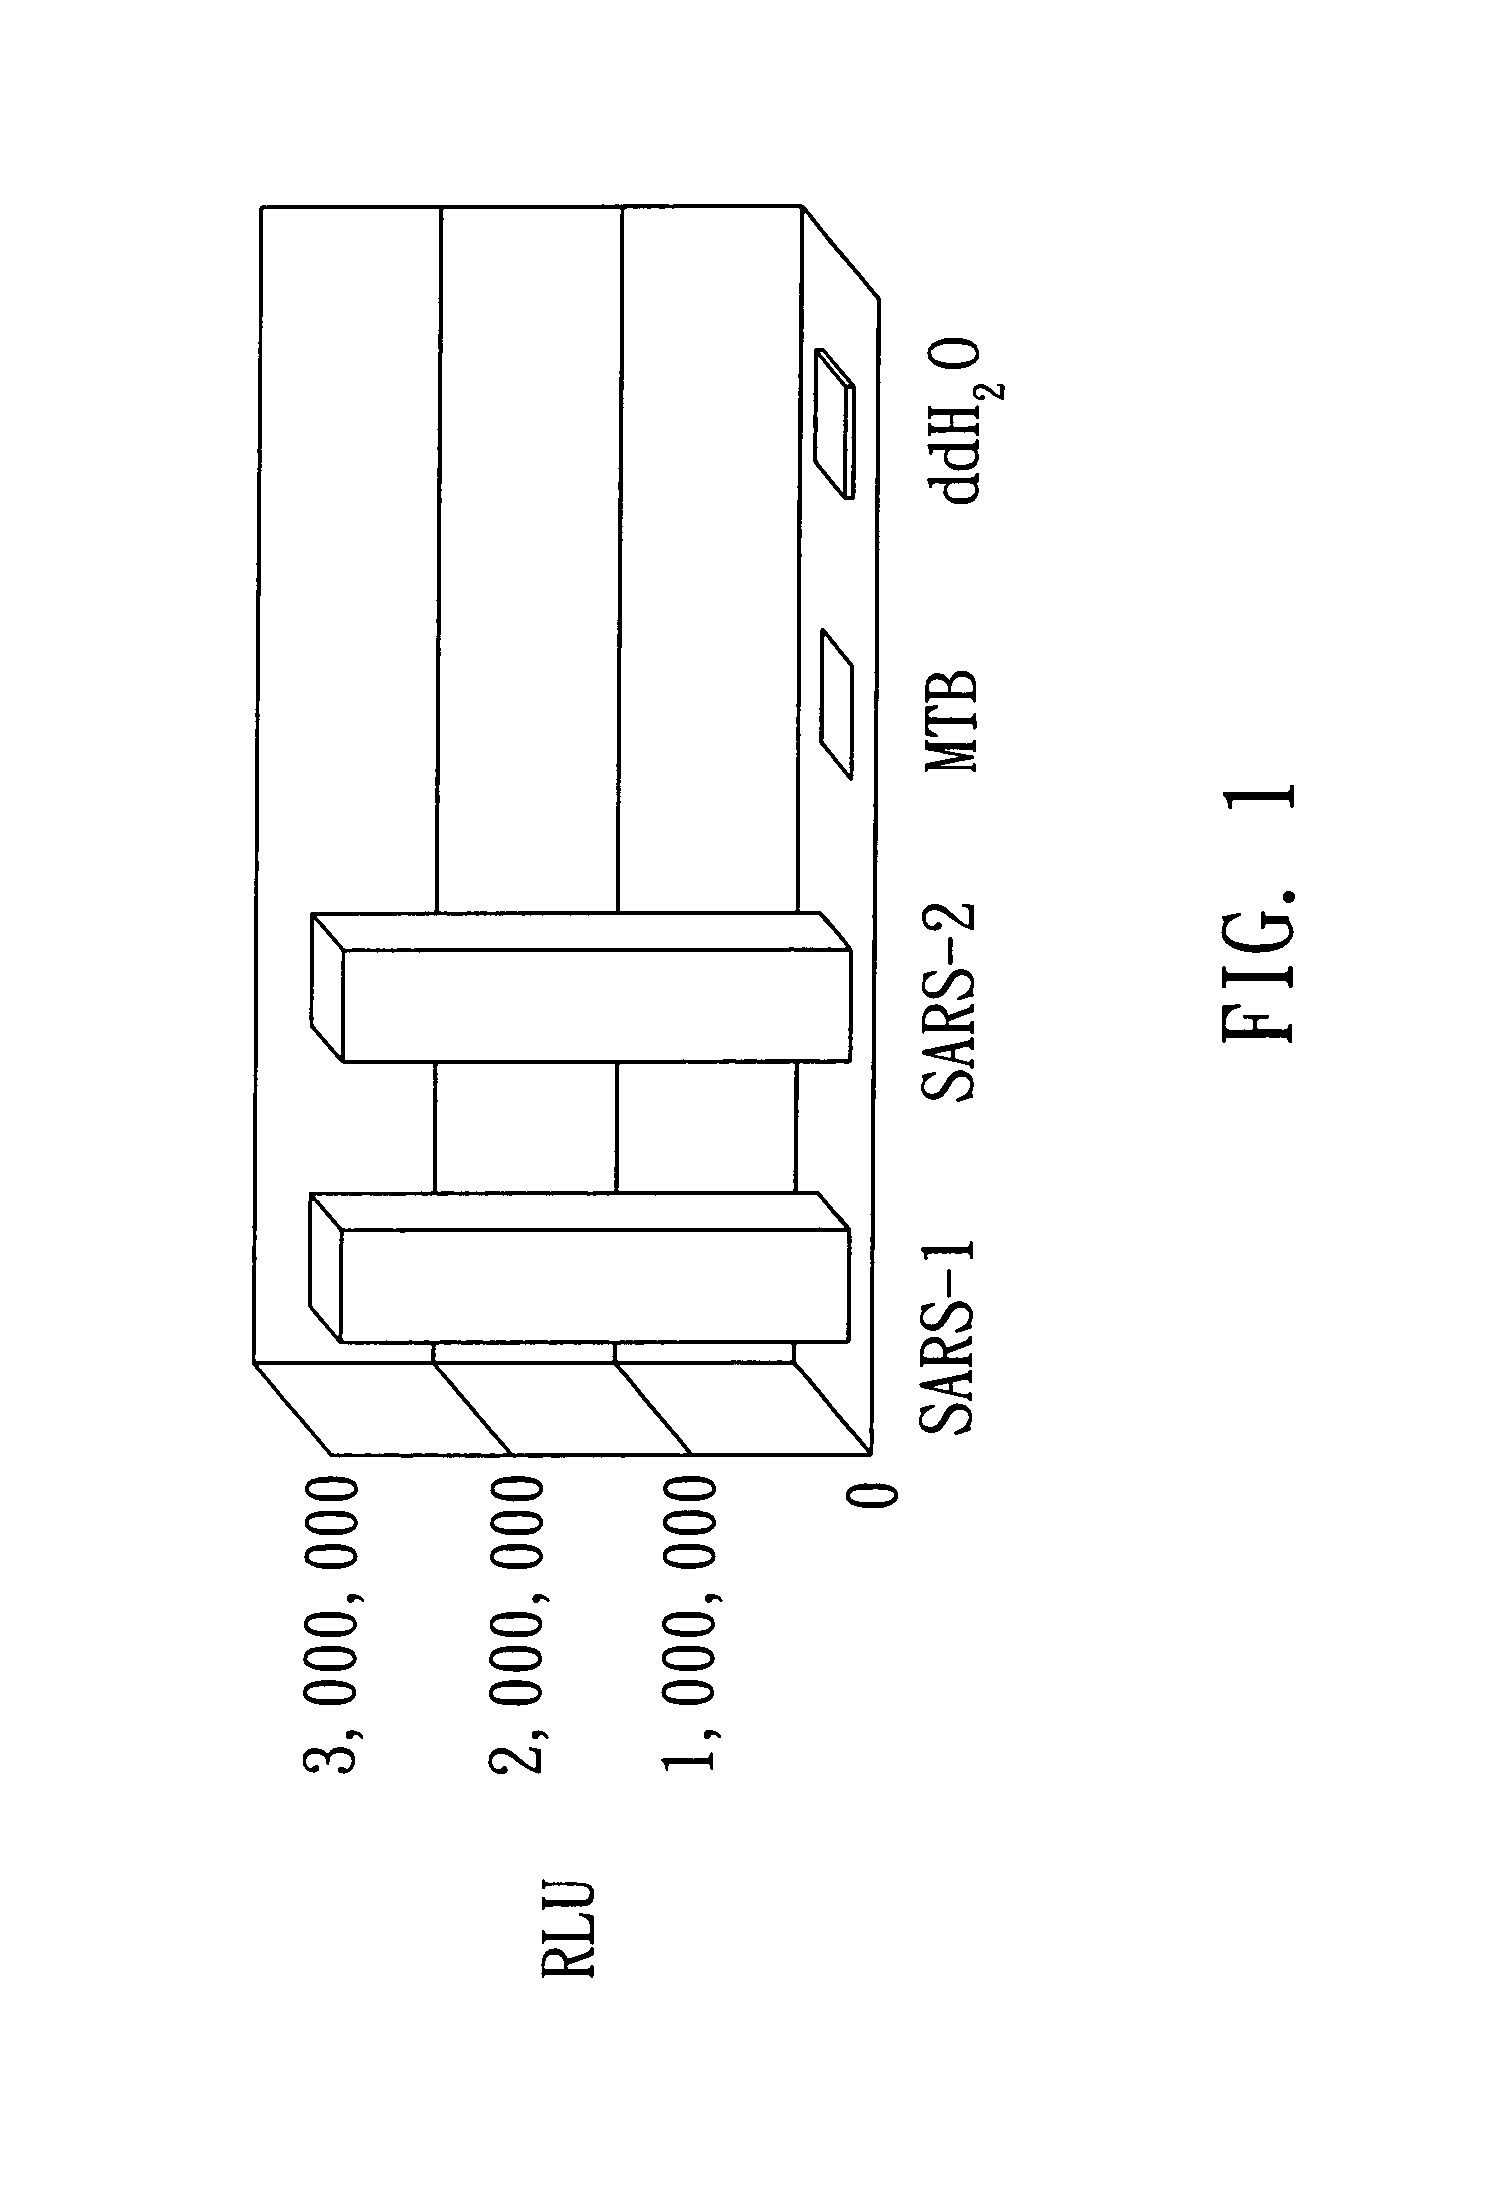 Assay system and methods for detecting SARS-CV